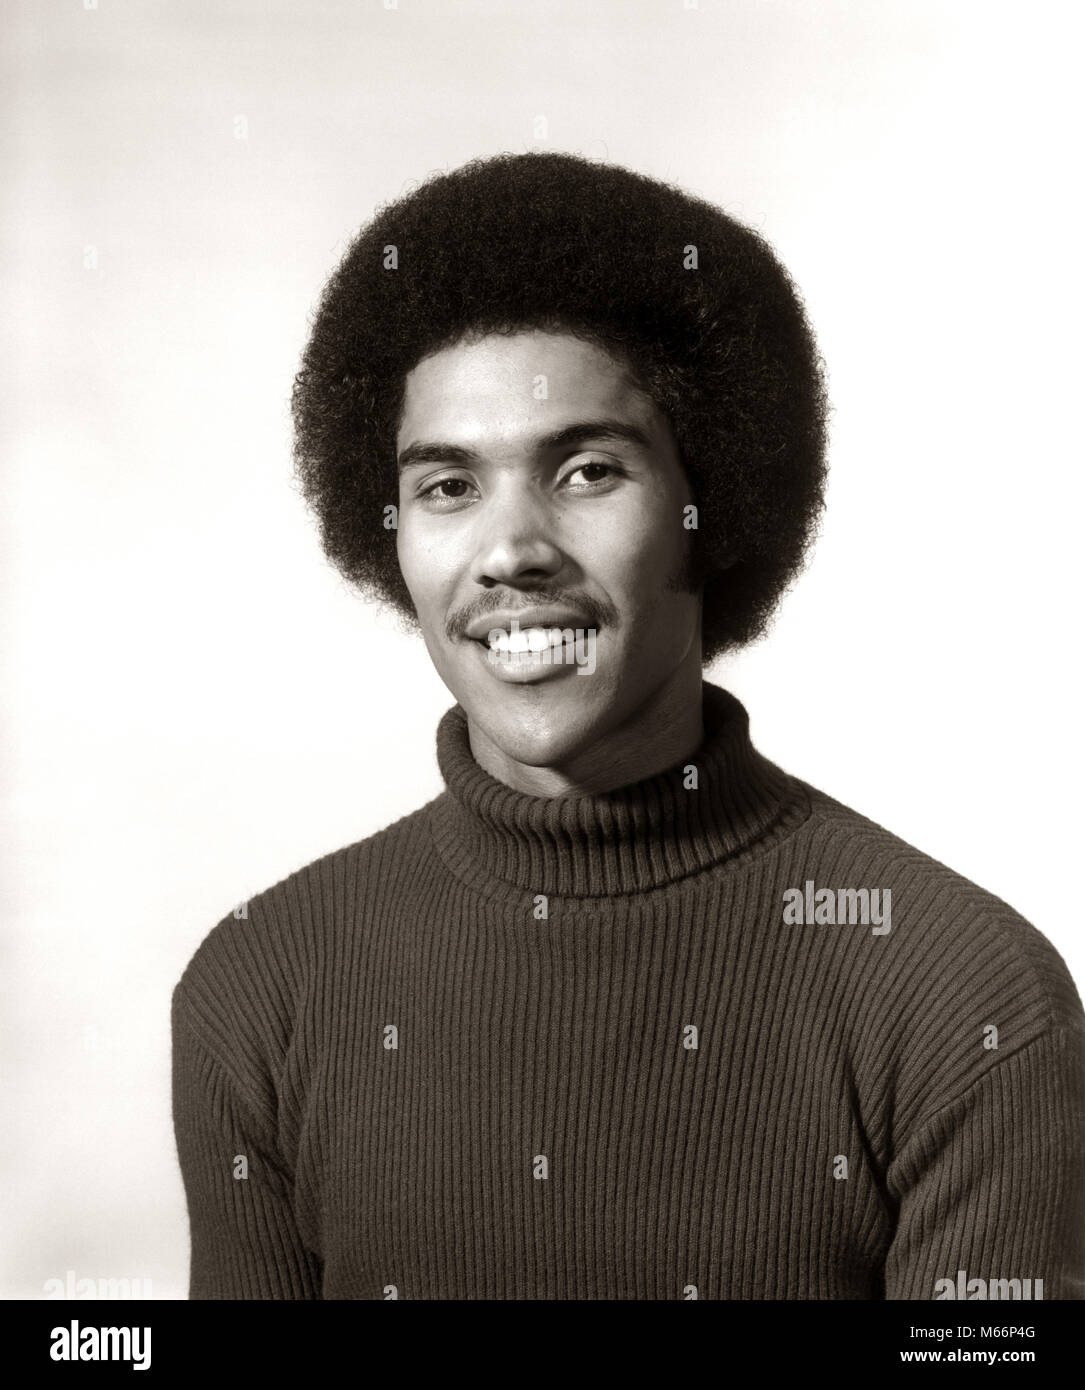 1970s 1975 SMILING AFRICAN AMERICAN MAN PORTRAIT WEARING TURTLENECK SWEATER AFRO HAIR STYLE LOOKING AT CAMERA - p8235 HAR001 HARS AFRICAN AMERICANS PRIDE AFRICAN AMERICAN R SMILES JOYFUL PANORAMIC HAIRDO MALES PEOPLE ADULTS YOUNG ADULT MAN AFRO HAIR STYLE B&W BLACK AND WHITE LOOKING AT CAMERA OLD FASHIONED PERSONS TURTLENECK Stock Photo